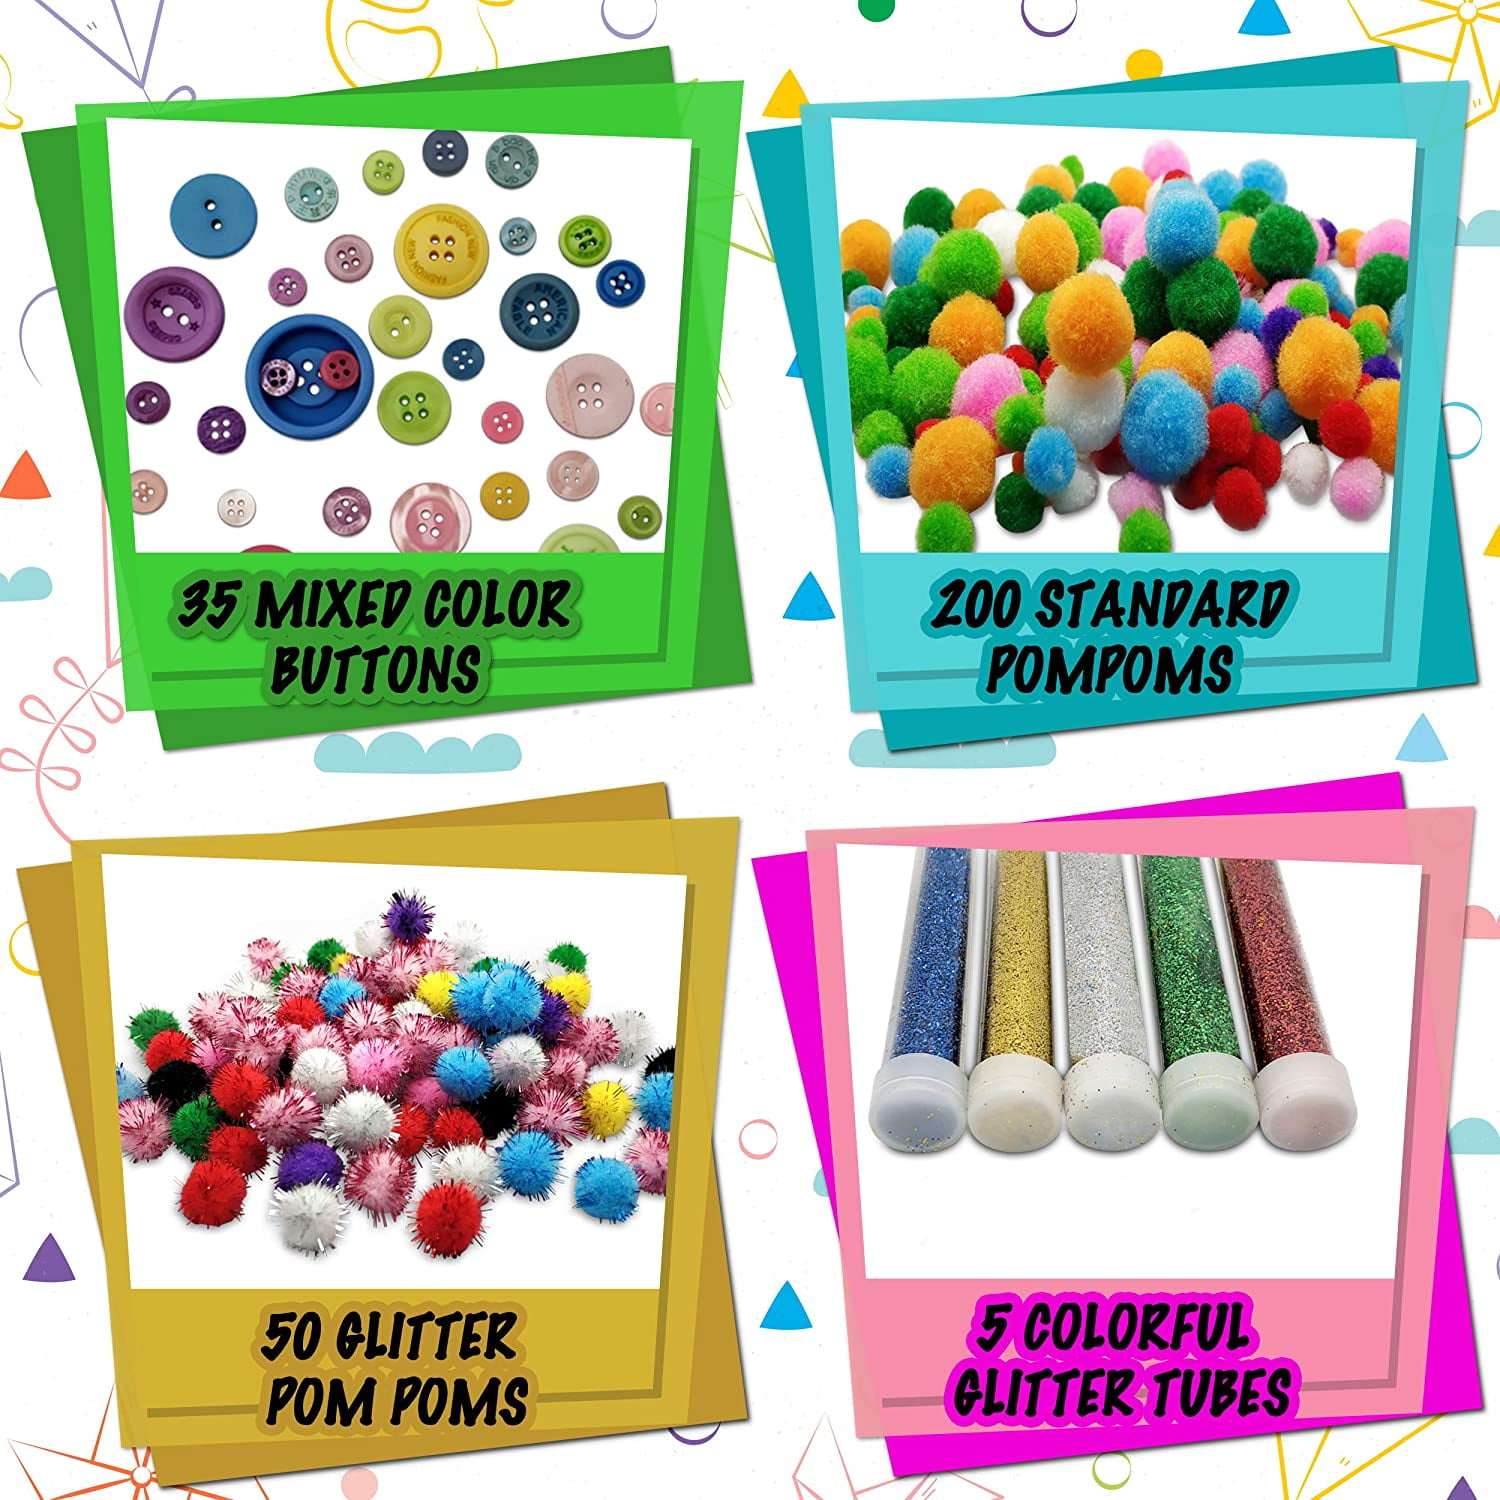  1500+ Pieces Arts and Crafts for Kids - Crafting Supplies for  Kids Ages 6-12 for Endless Hours of Fun - As a Gift Ideas Kids Craft Kit  Will Make Kids Happy 